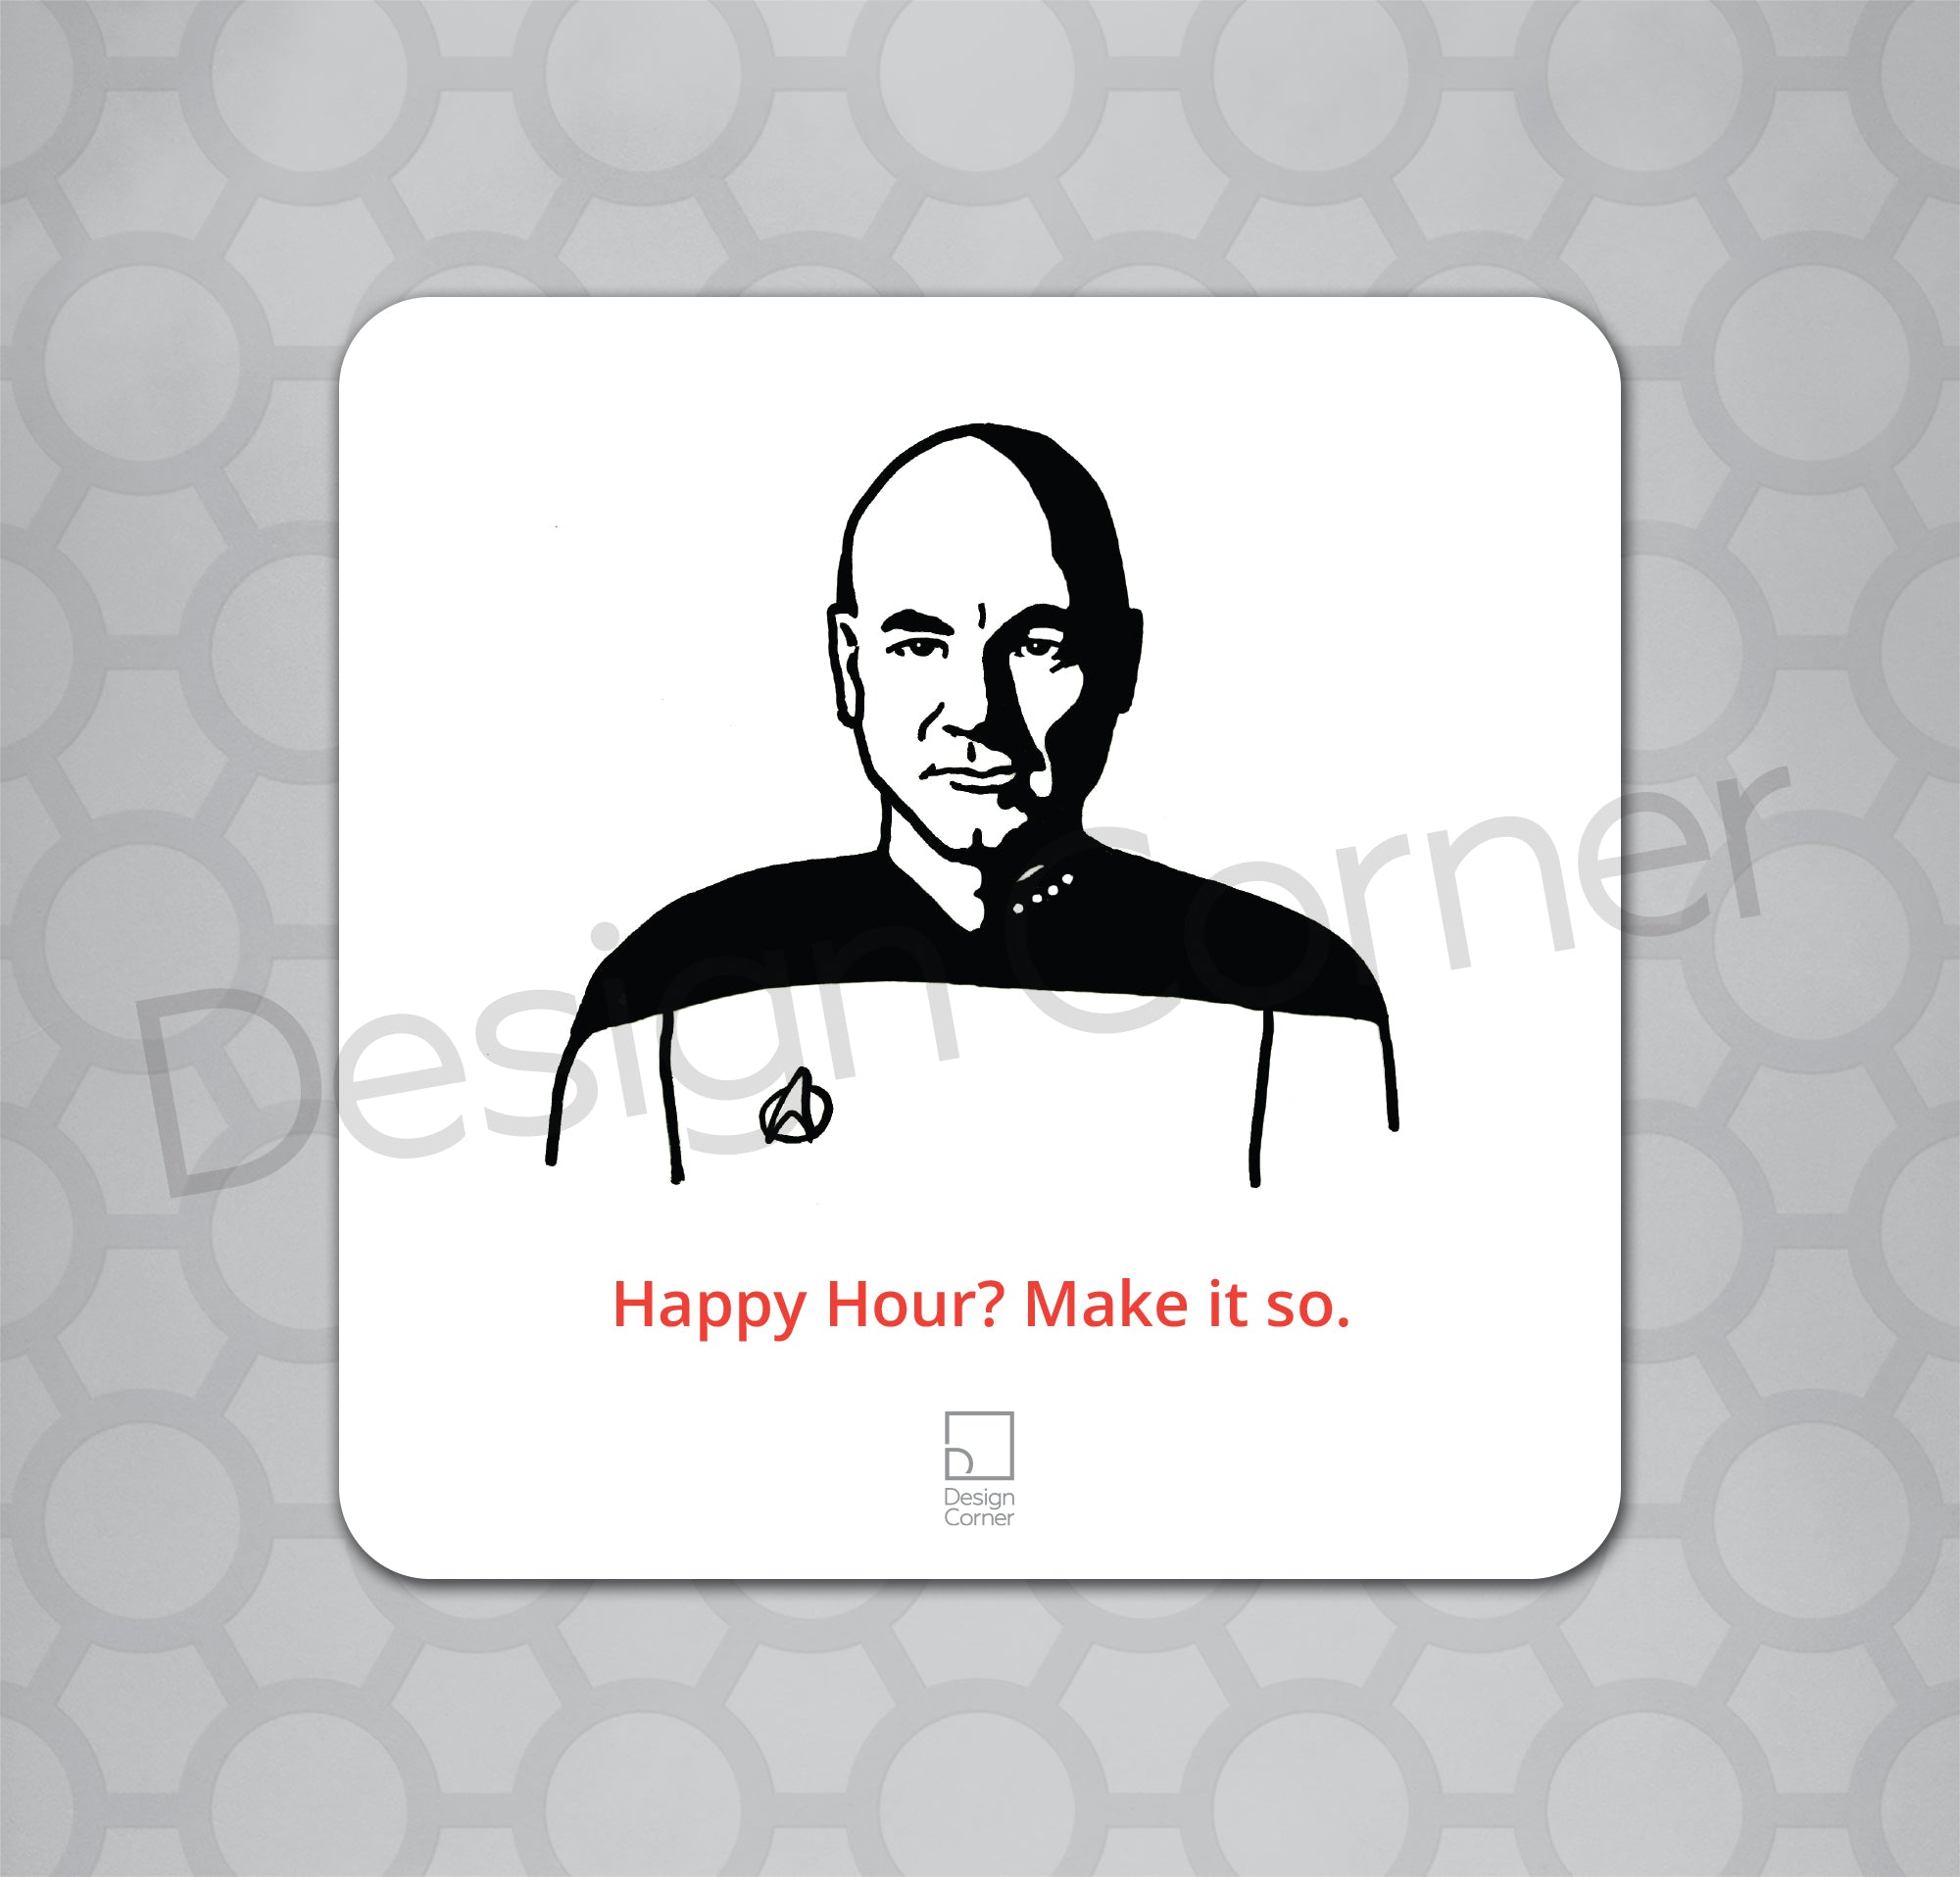 Illustration of Star Trek Caption Picard on a coaster with caption "Happy Hour? Make it so."